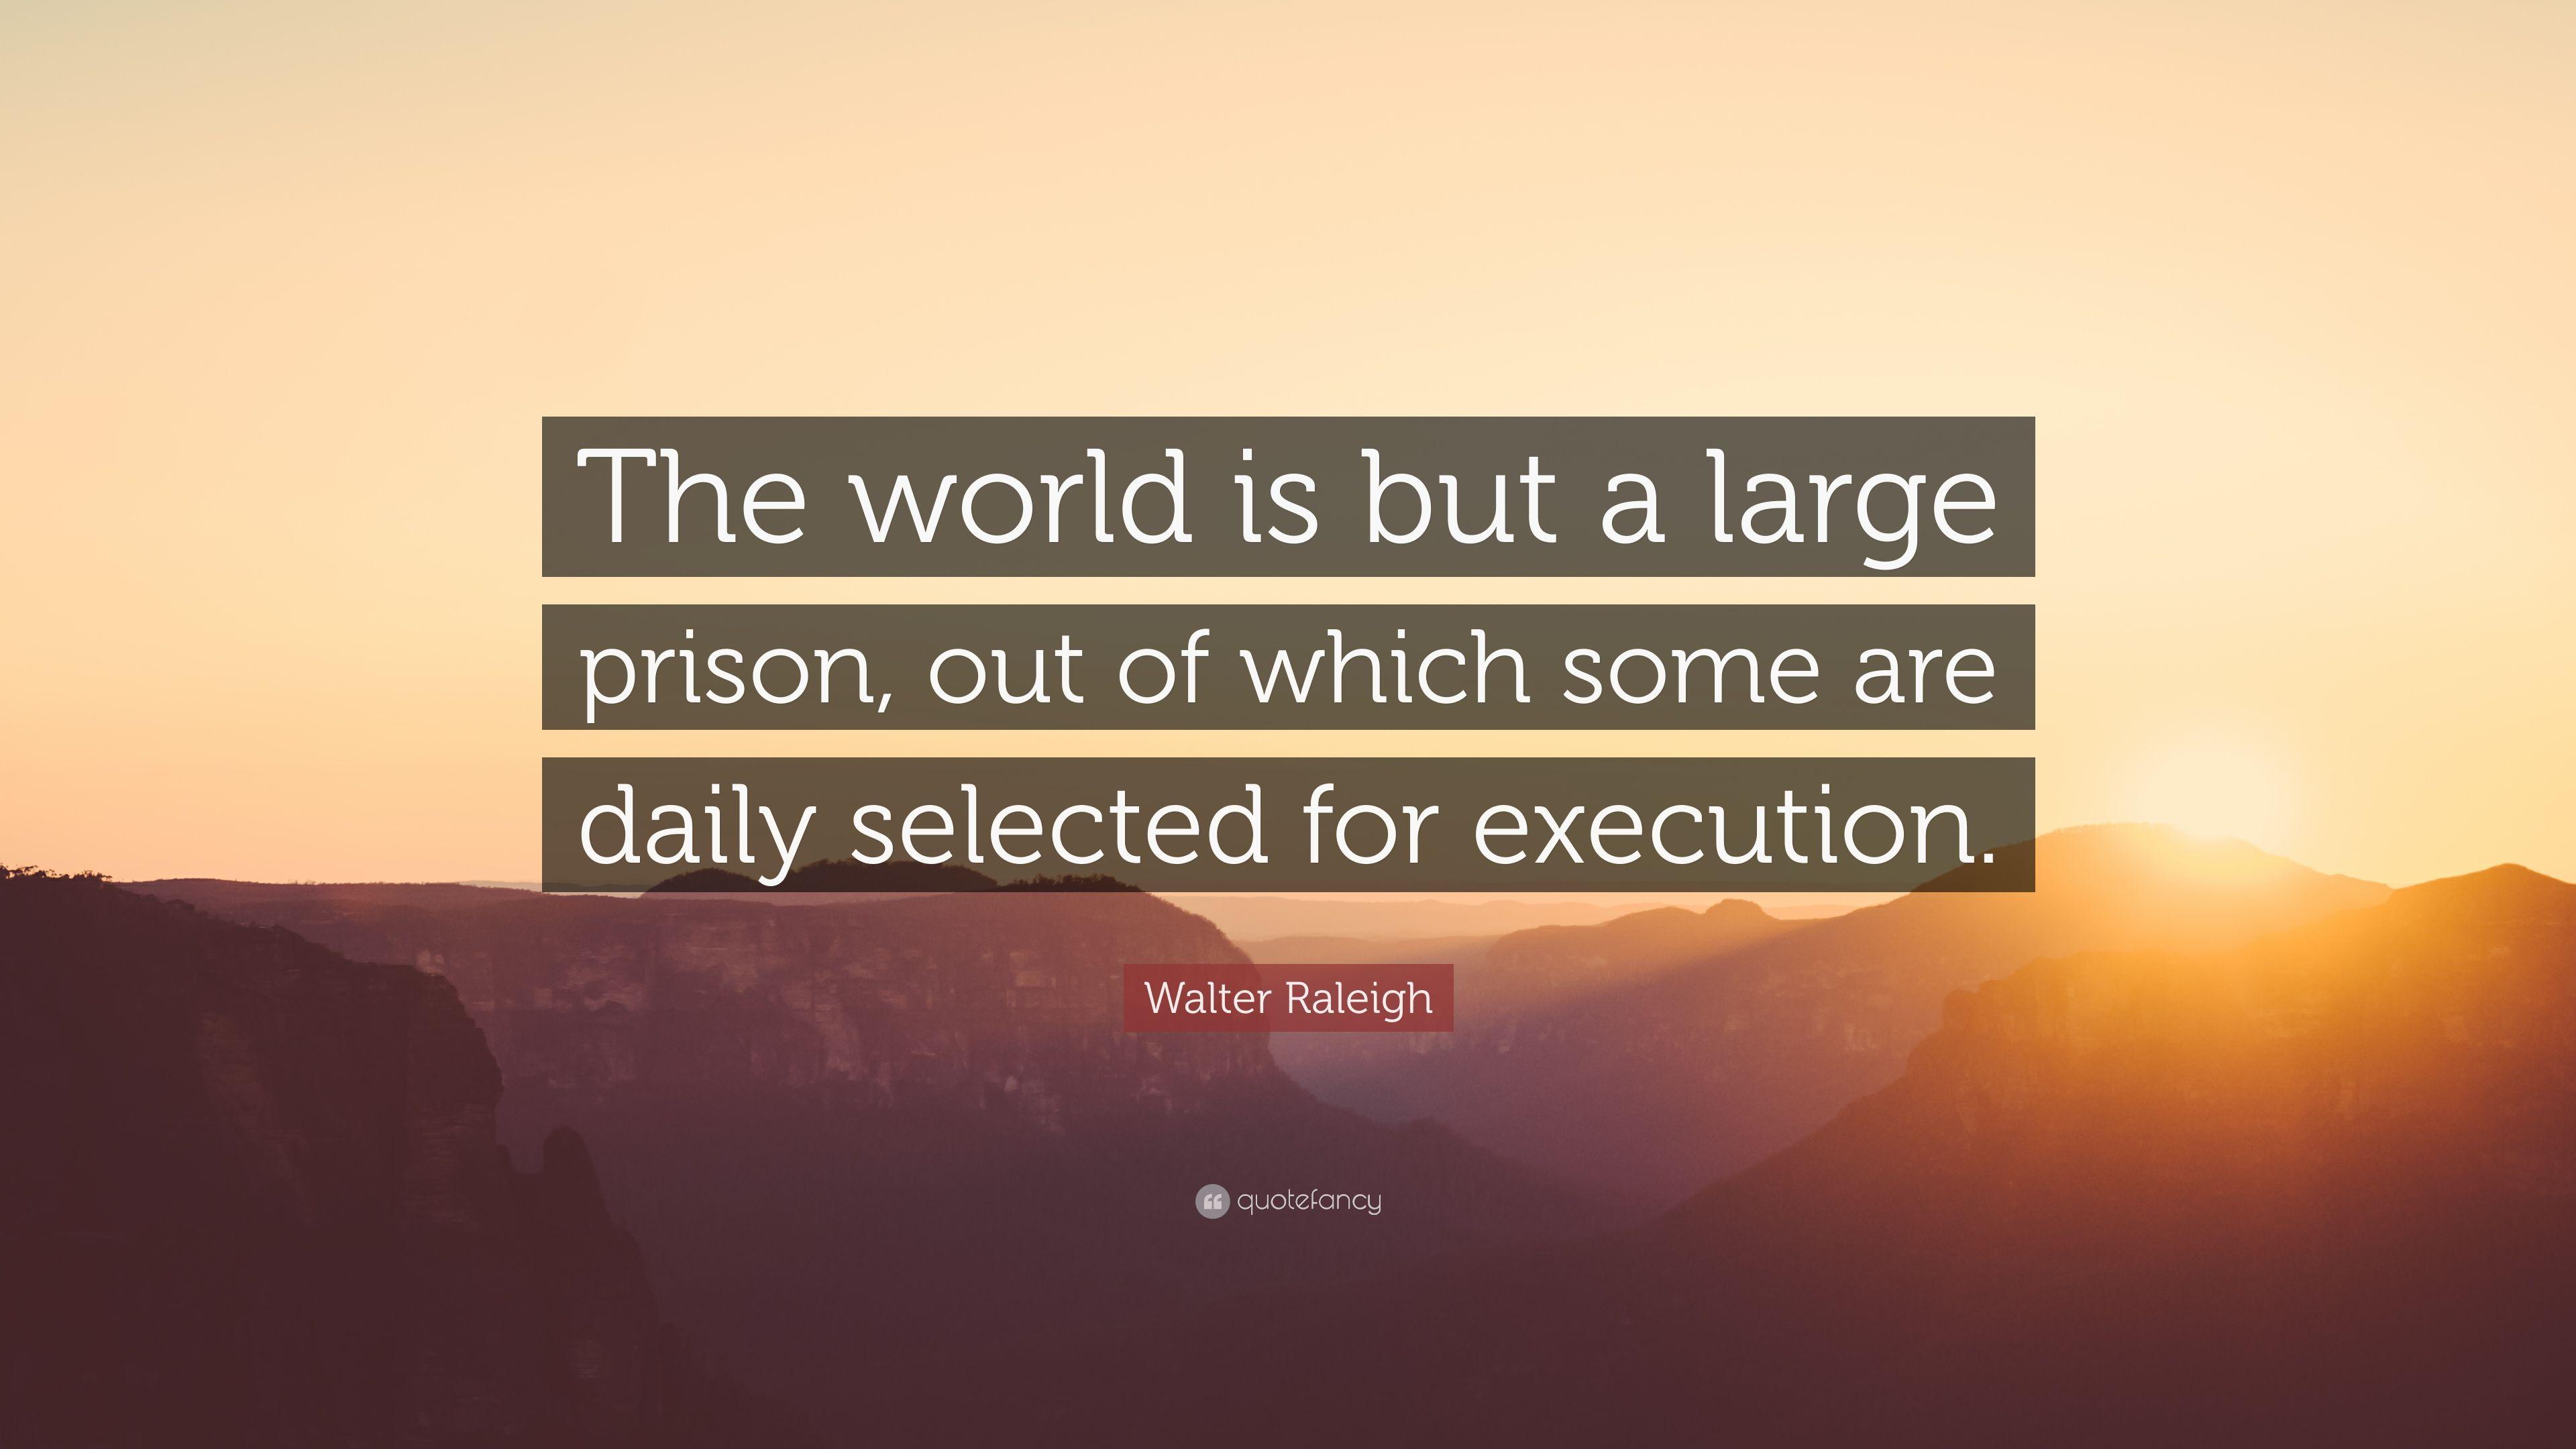 Walter Raleigh Quote: “The world is but a large prison, out of which